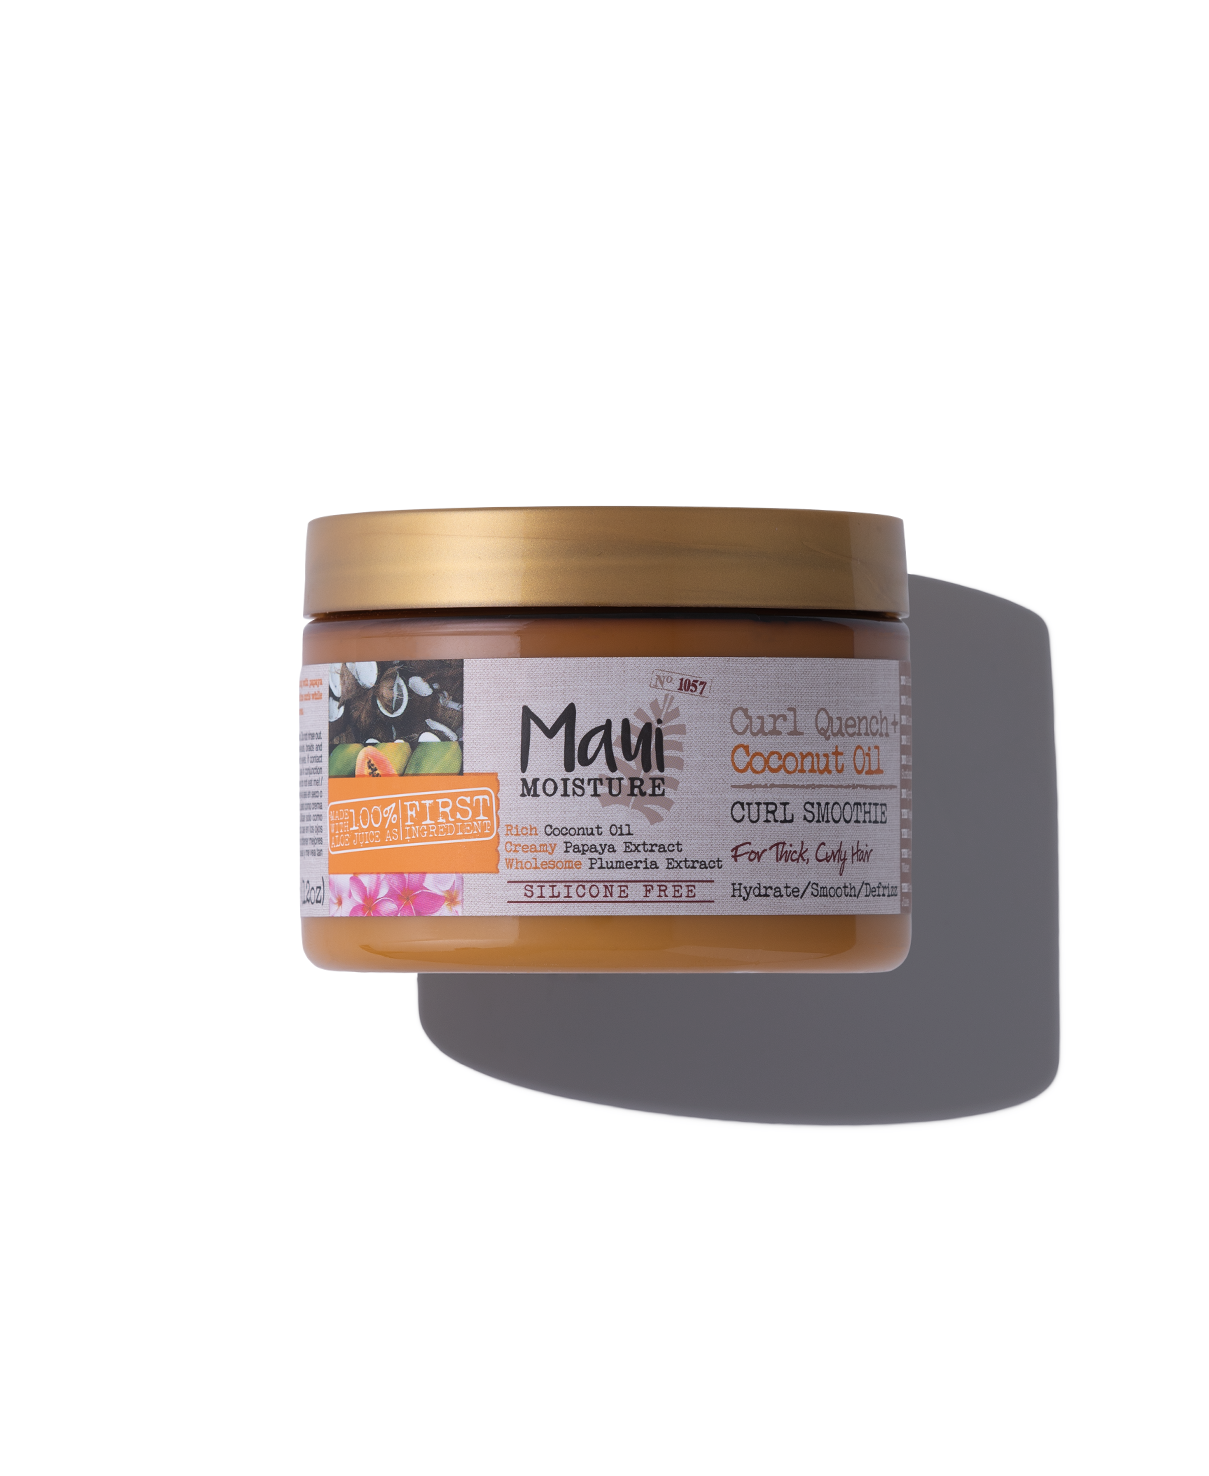 Maui Moisture Curl Quench + Coconut Oil Curl Smoothie - 340 g